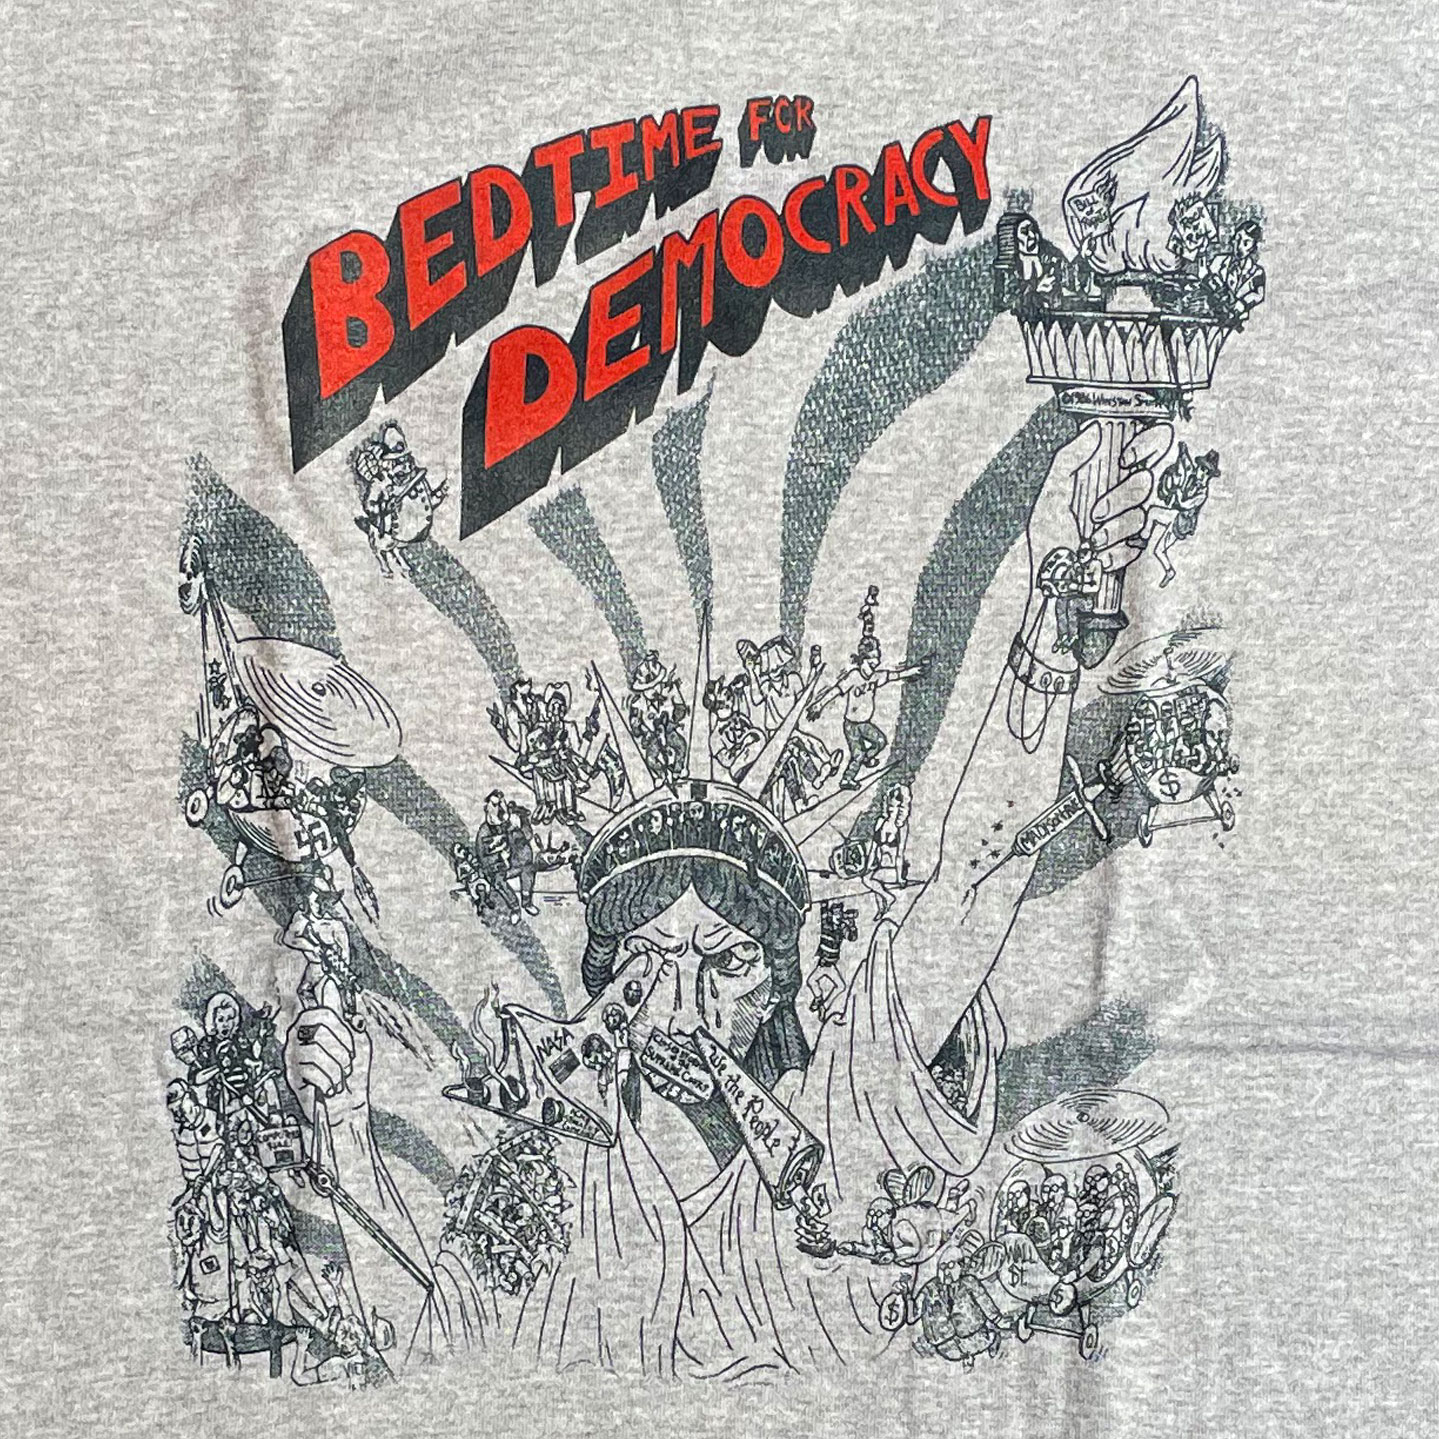 DEAD KENNEDYS Tシャツ BEDTIME FOR DEMOCRACY2